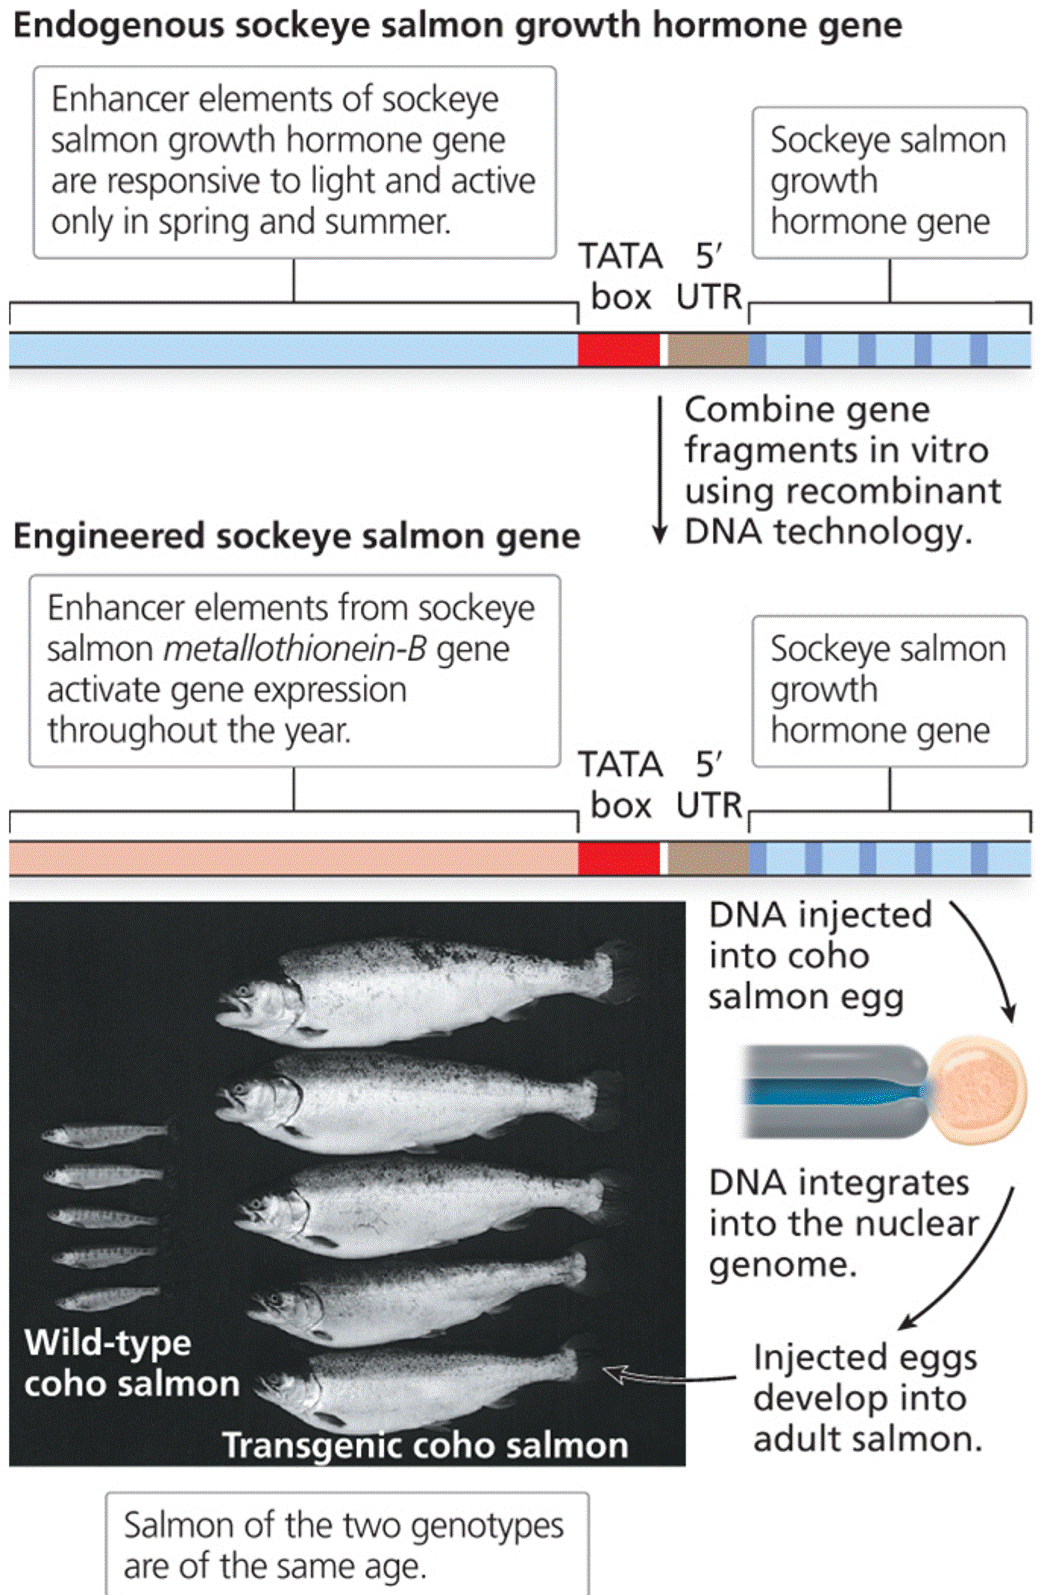 Creation of transgenic salmon through injection of DNA into salmon eggs